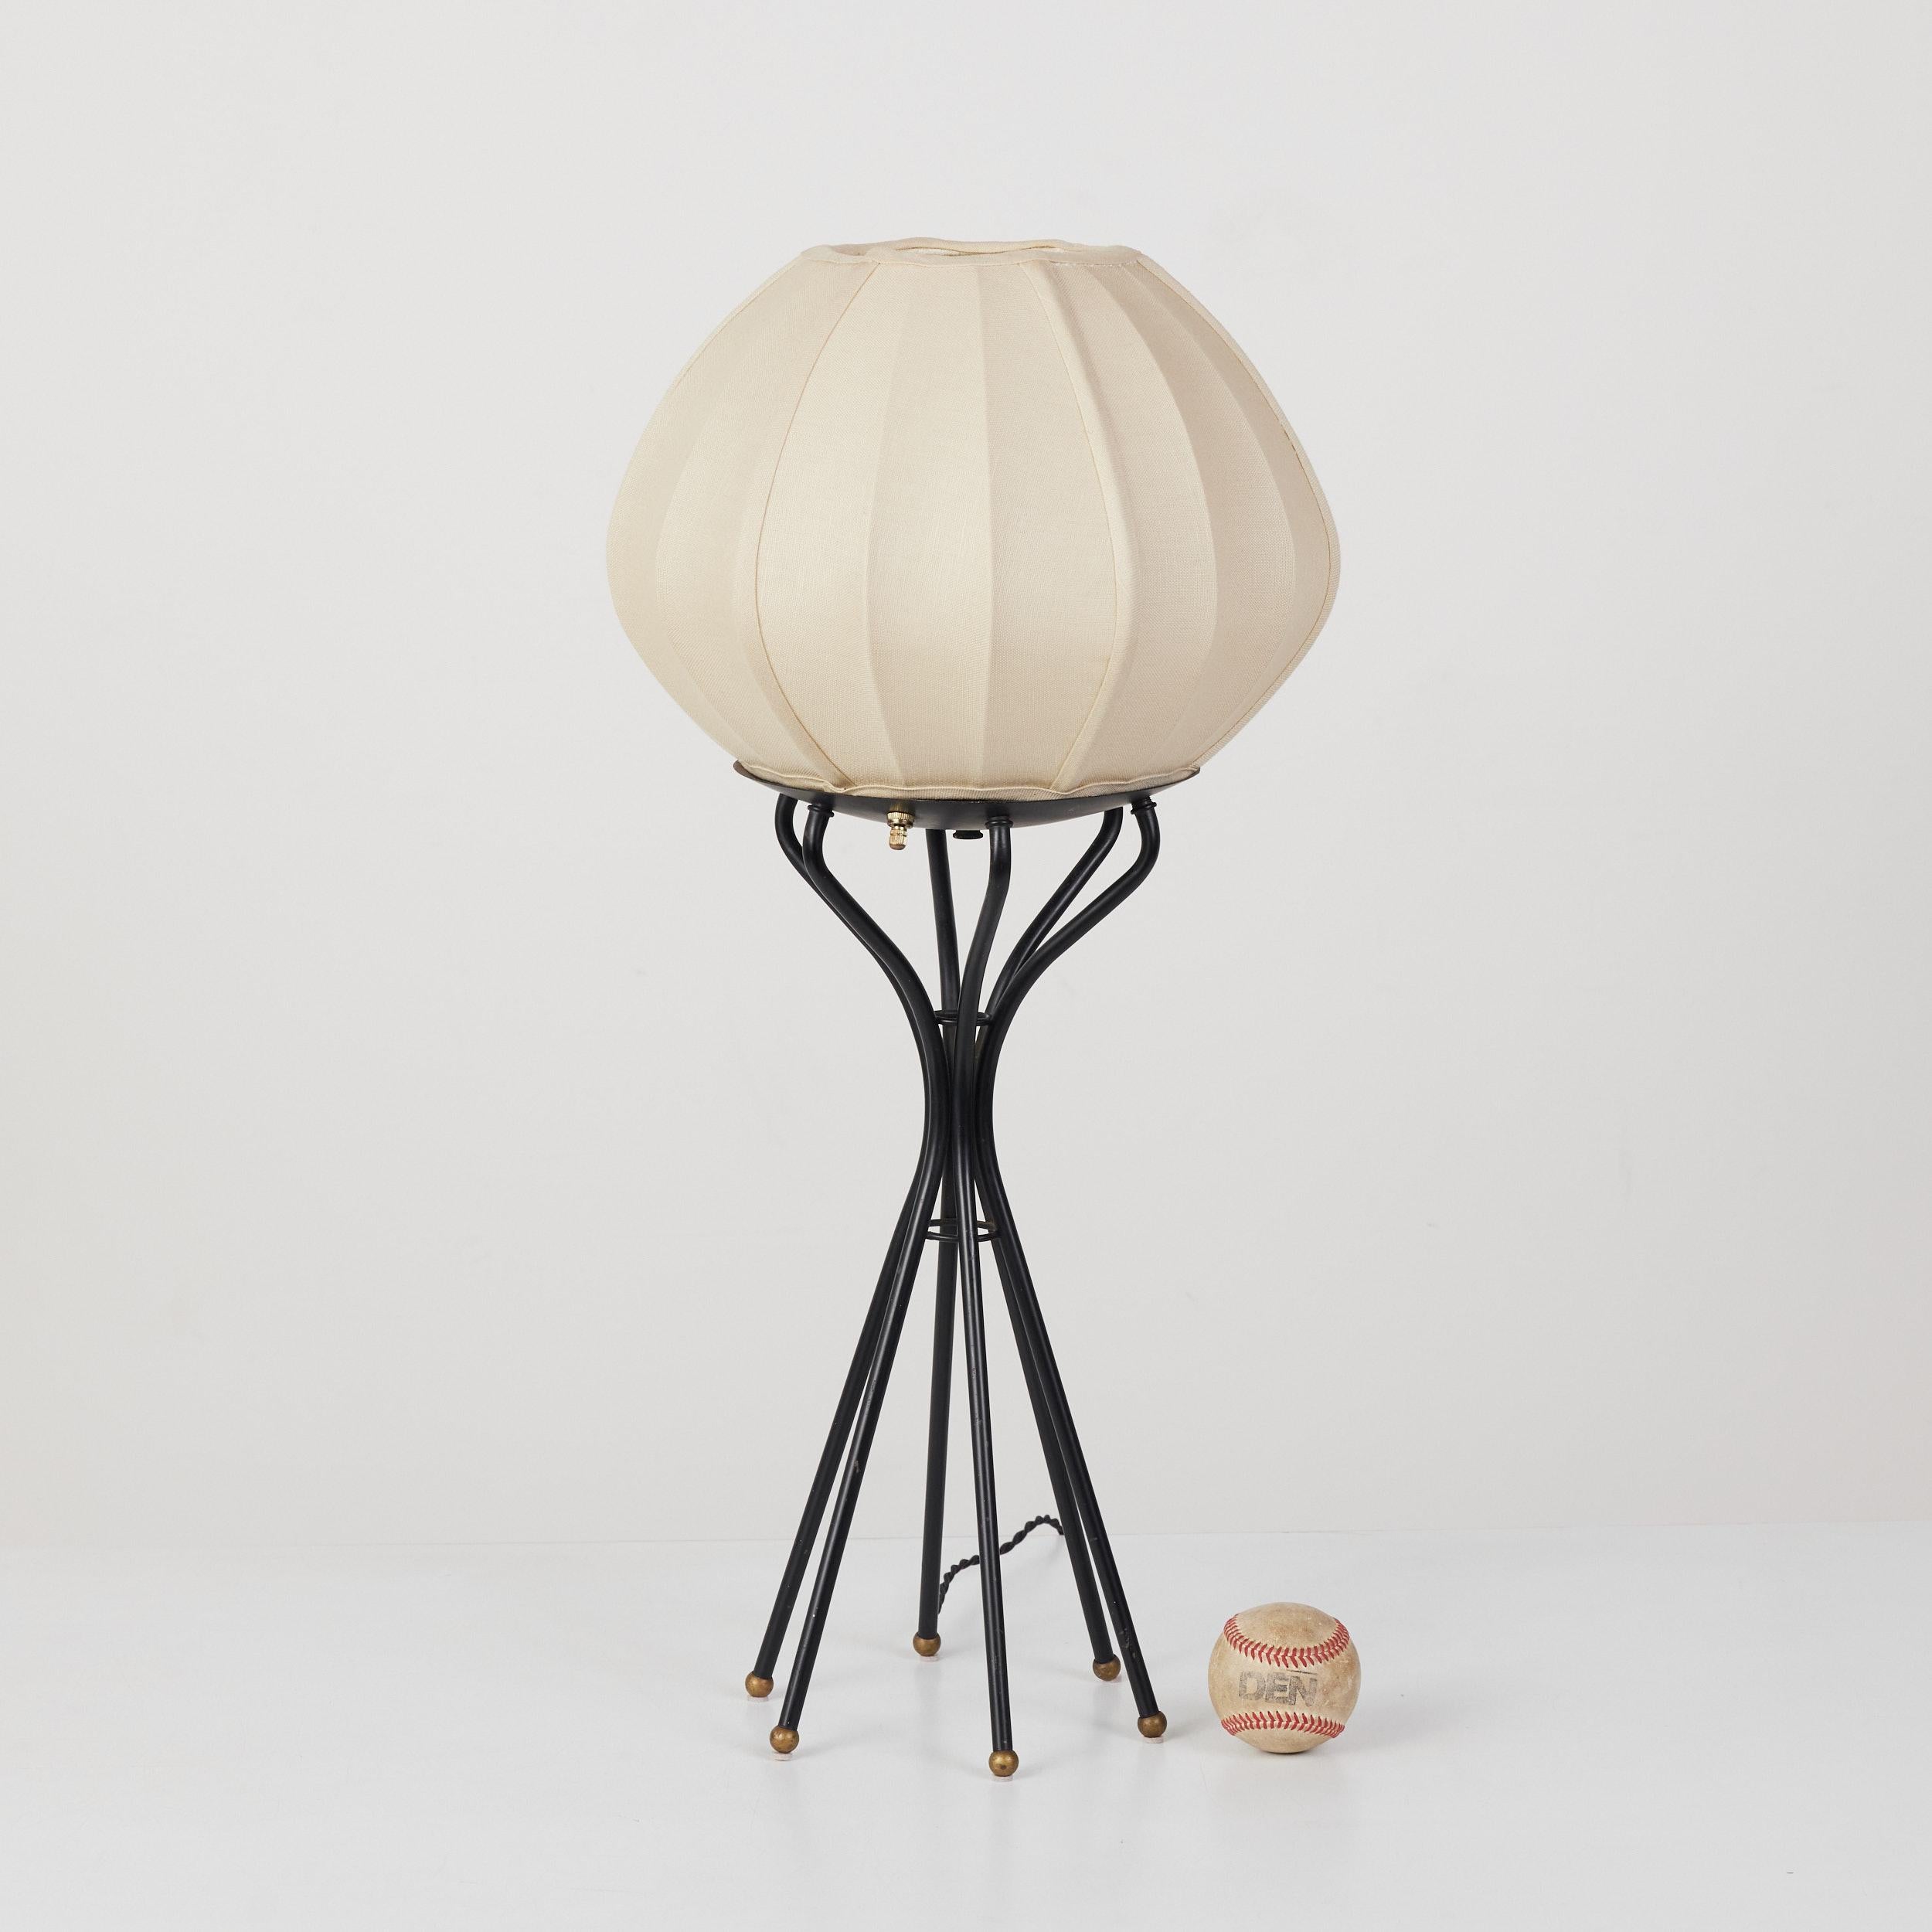 Table lamp features a linen wrapped shade on an enameled steel frame. The base of the lamp splays out to six legs, each finished with a brass ball foot. The lamp has a brass on/off switch on the bottom of the shade. This piece has been newly rewired